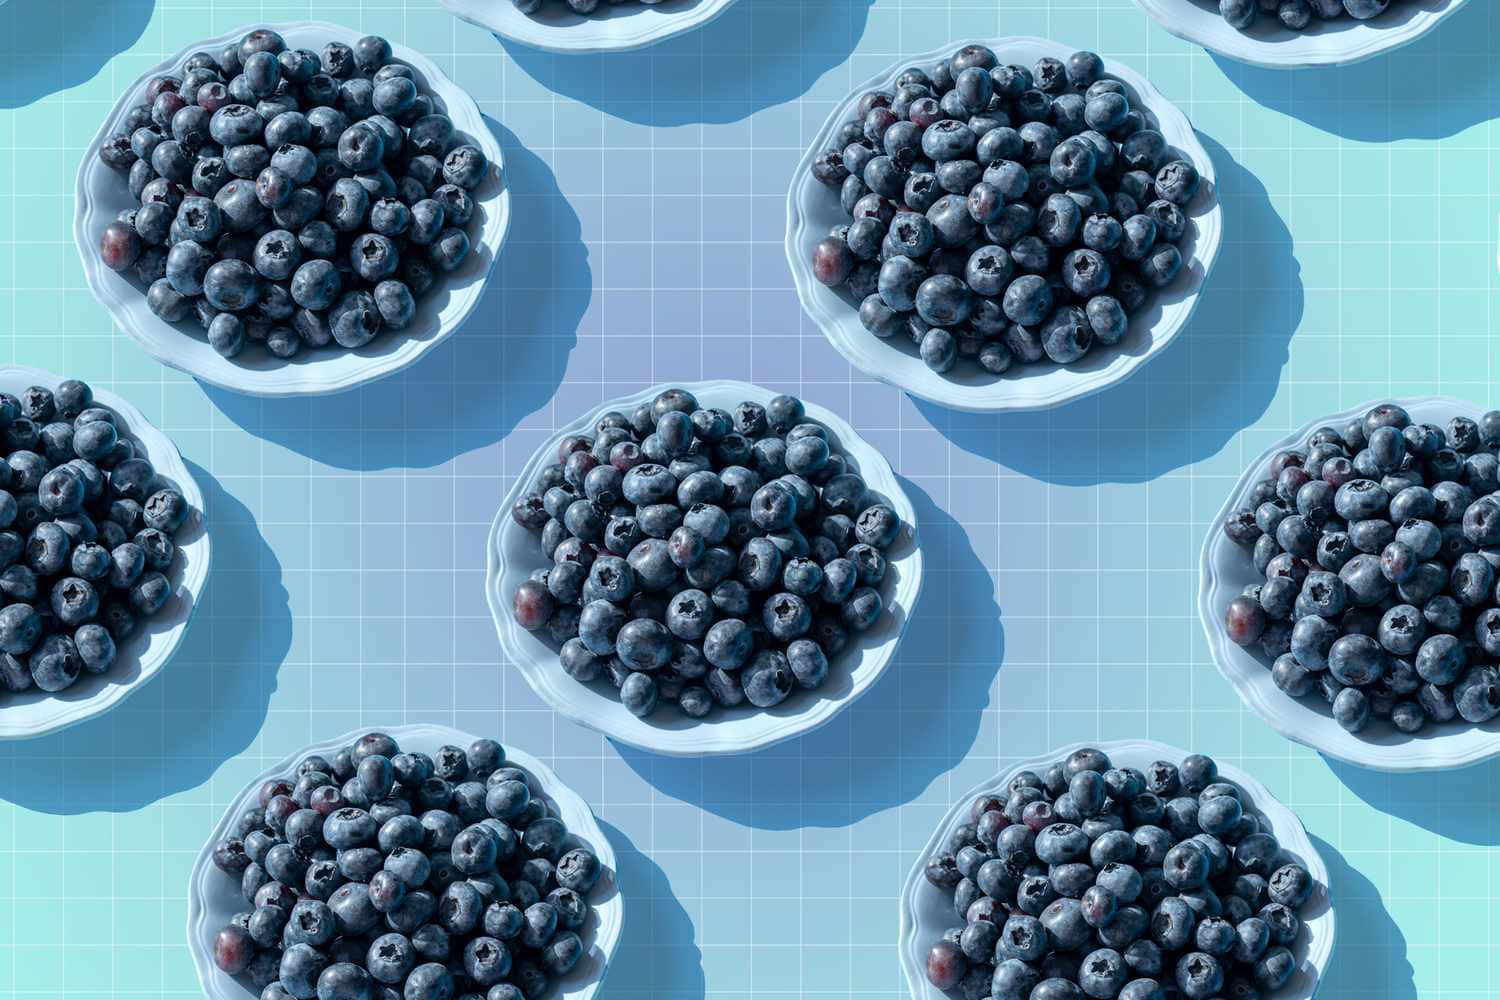 “The Sweetness of Blueberries”